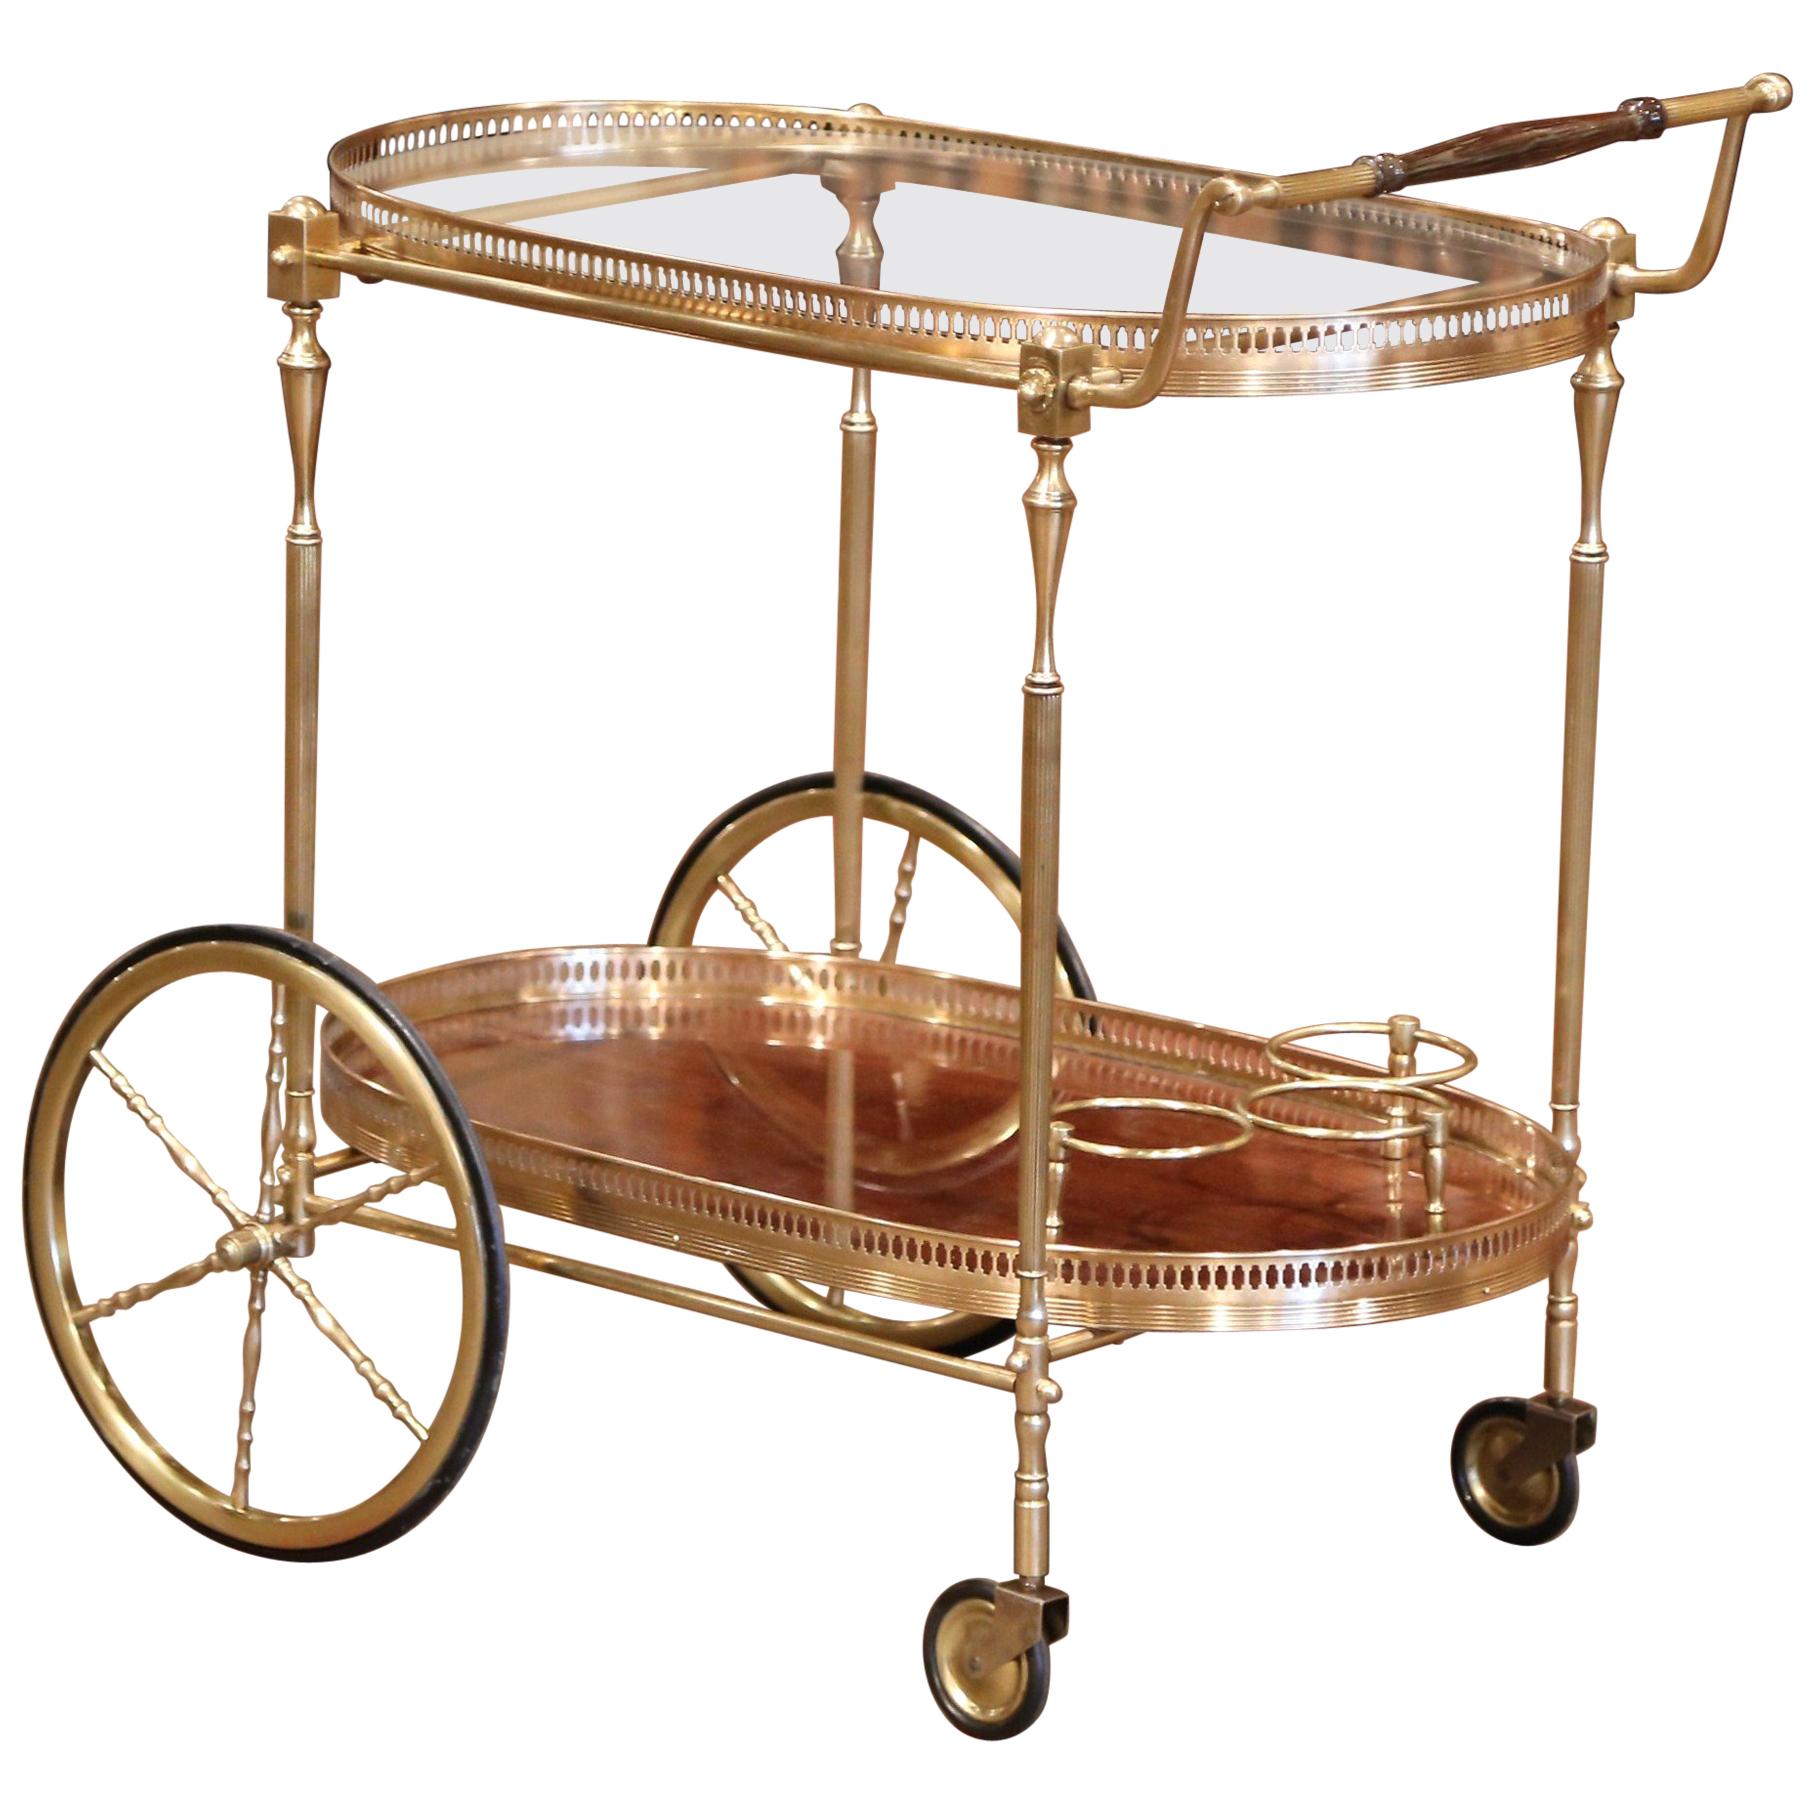 Early 20th Century French Brass and Wood Desert Table or Bar Cart on Wheels